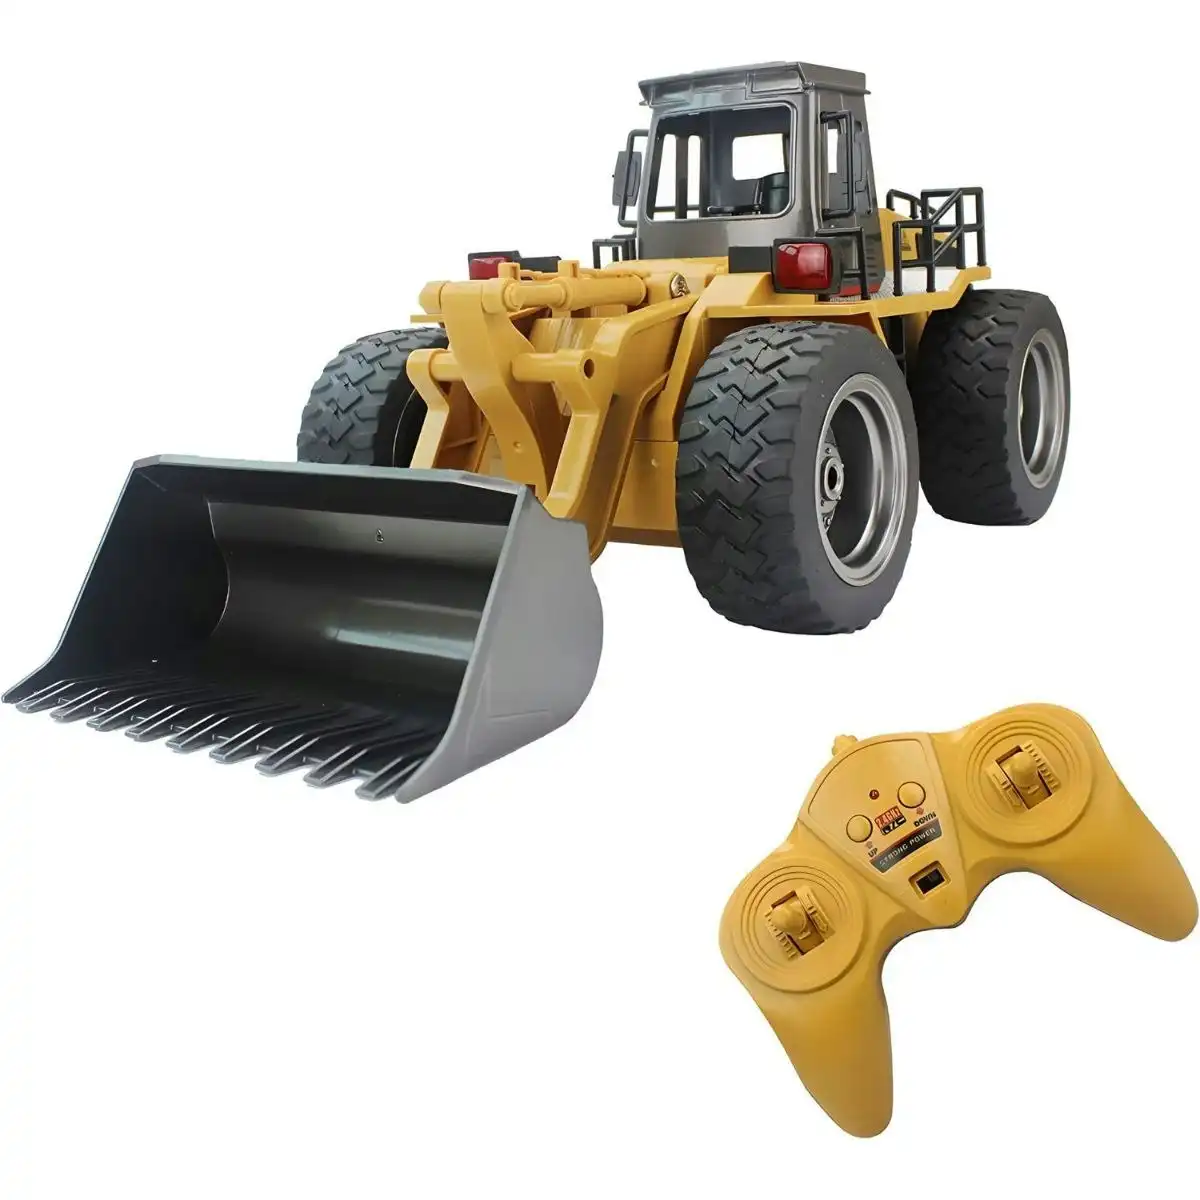 Kidst PowerLoader High-Performance RC Toy Bulldozer for Imaginative Play